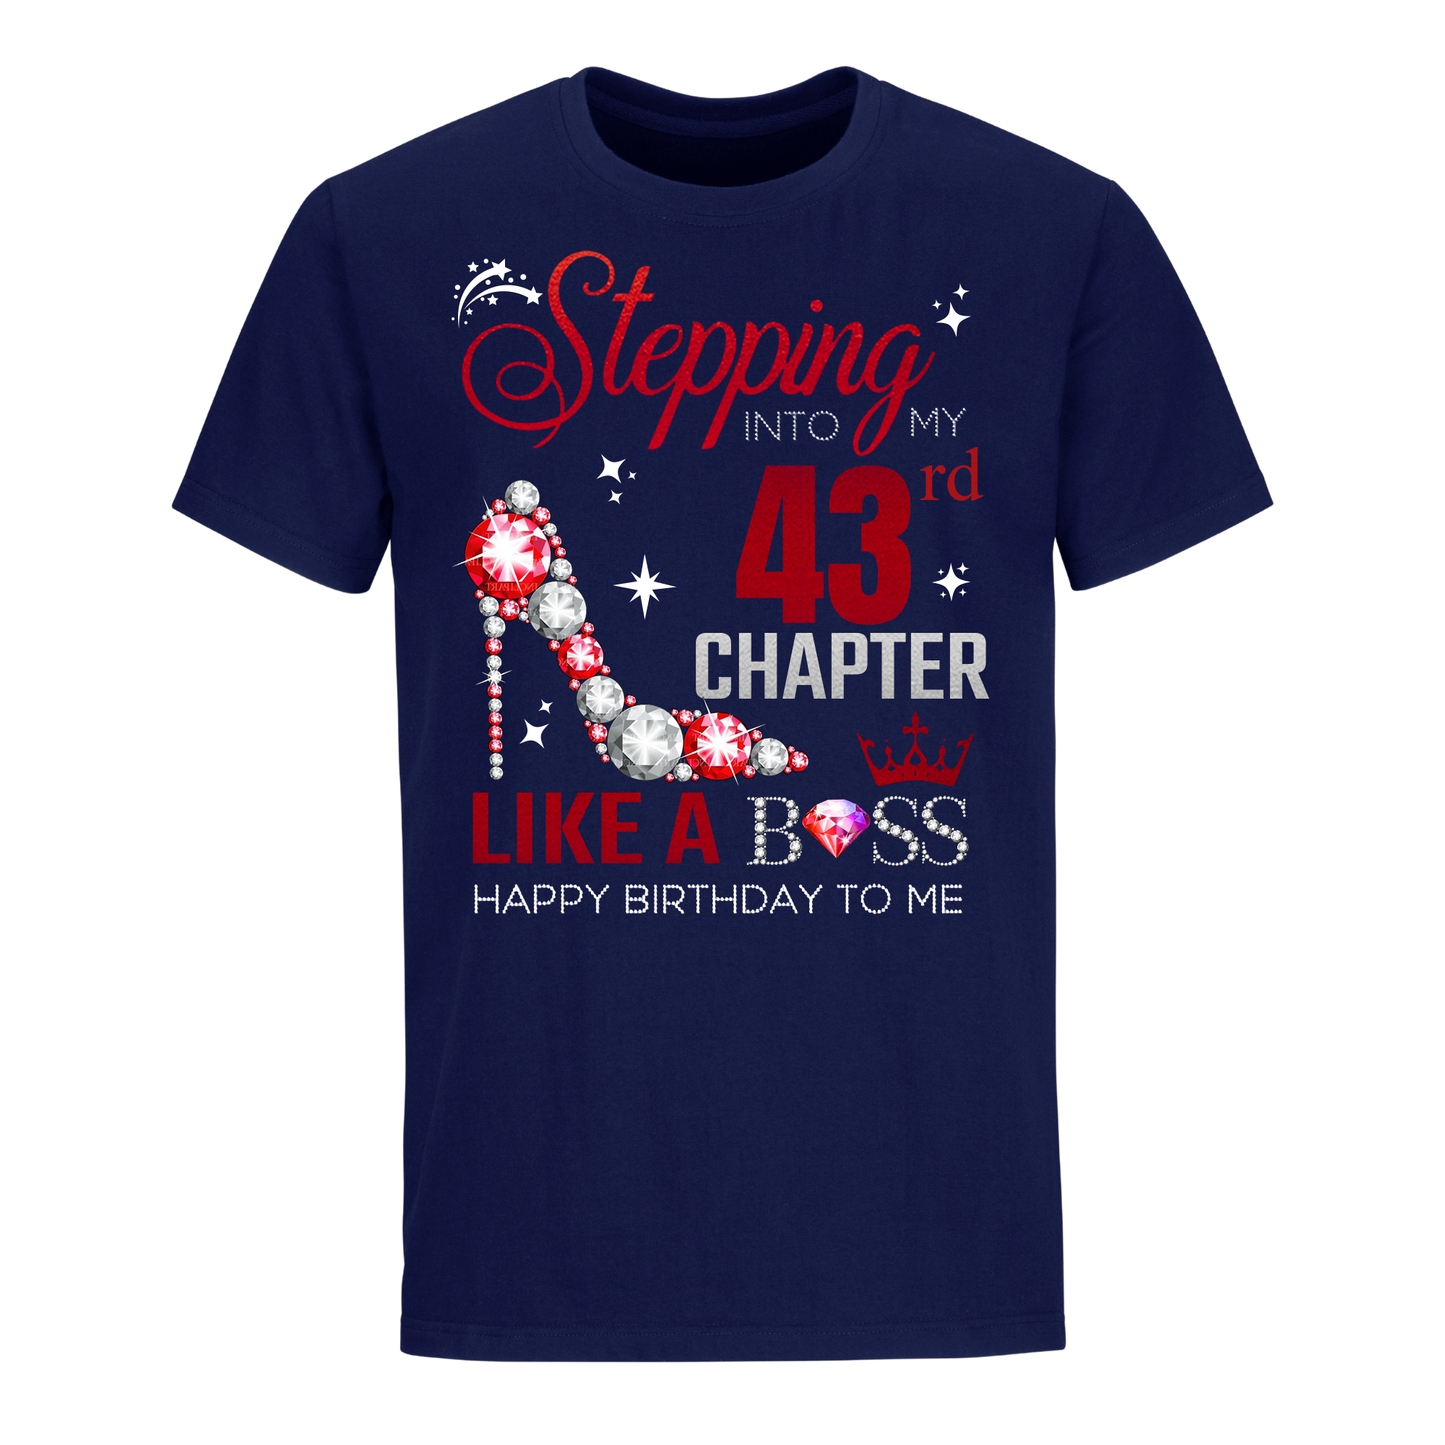 STEPPING INTO MY 43RD CHAPTER UNISEX SHIRT